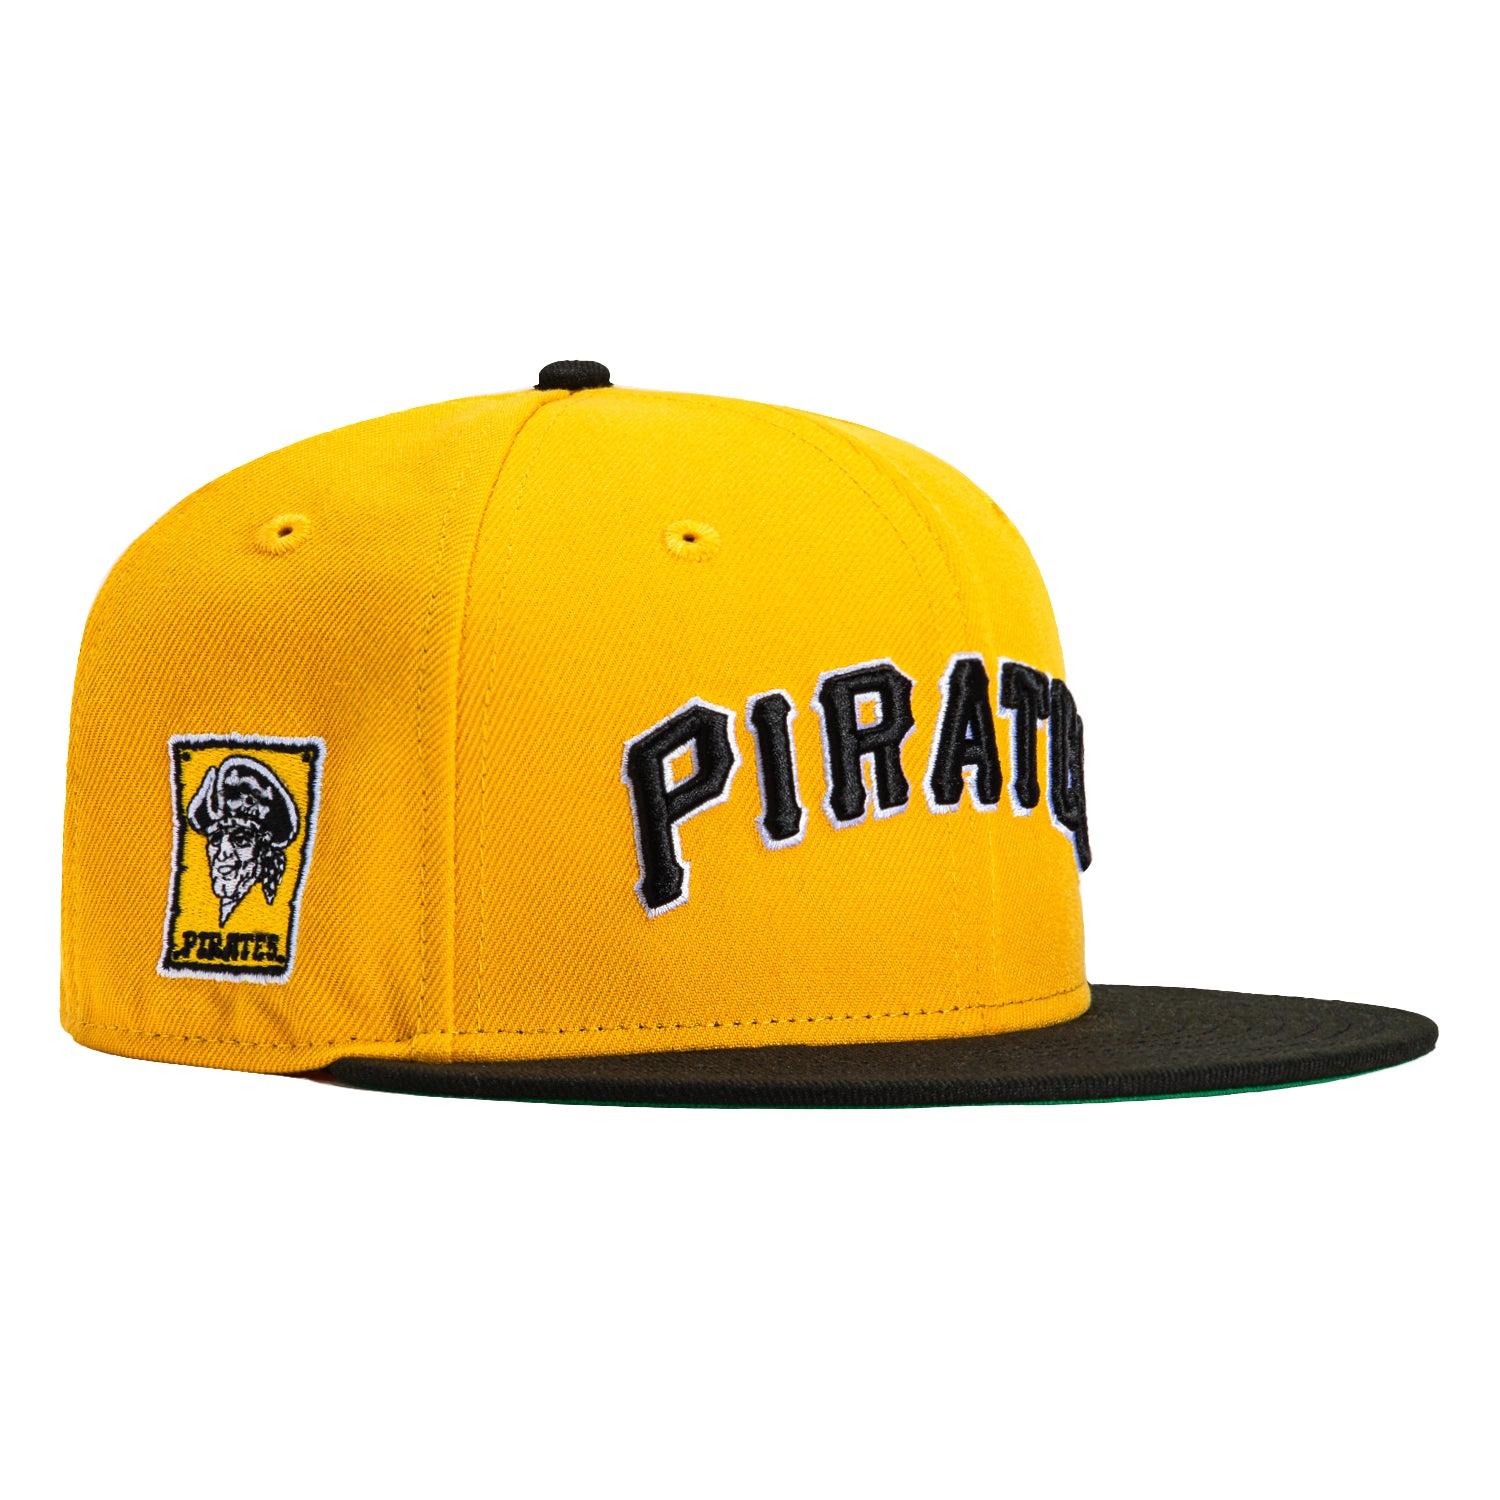 New Era 59Fifty Pittsburgh Pirates Club Patch Jersey Hat - Gold, Black ...